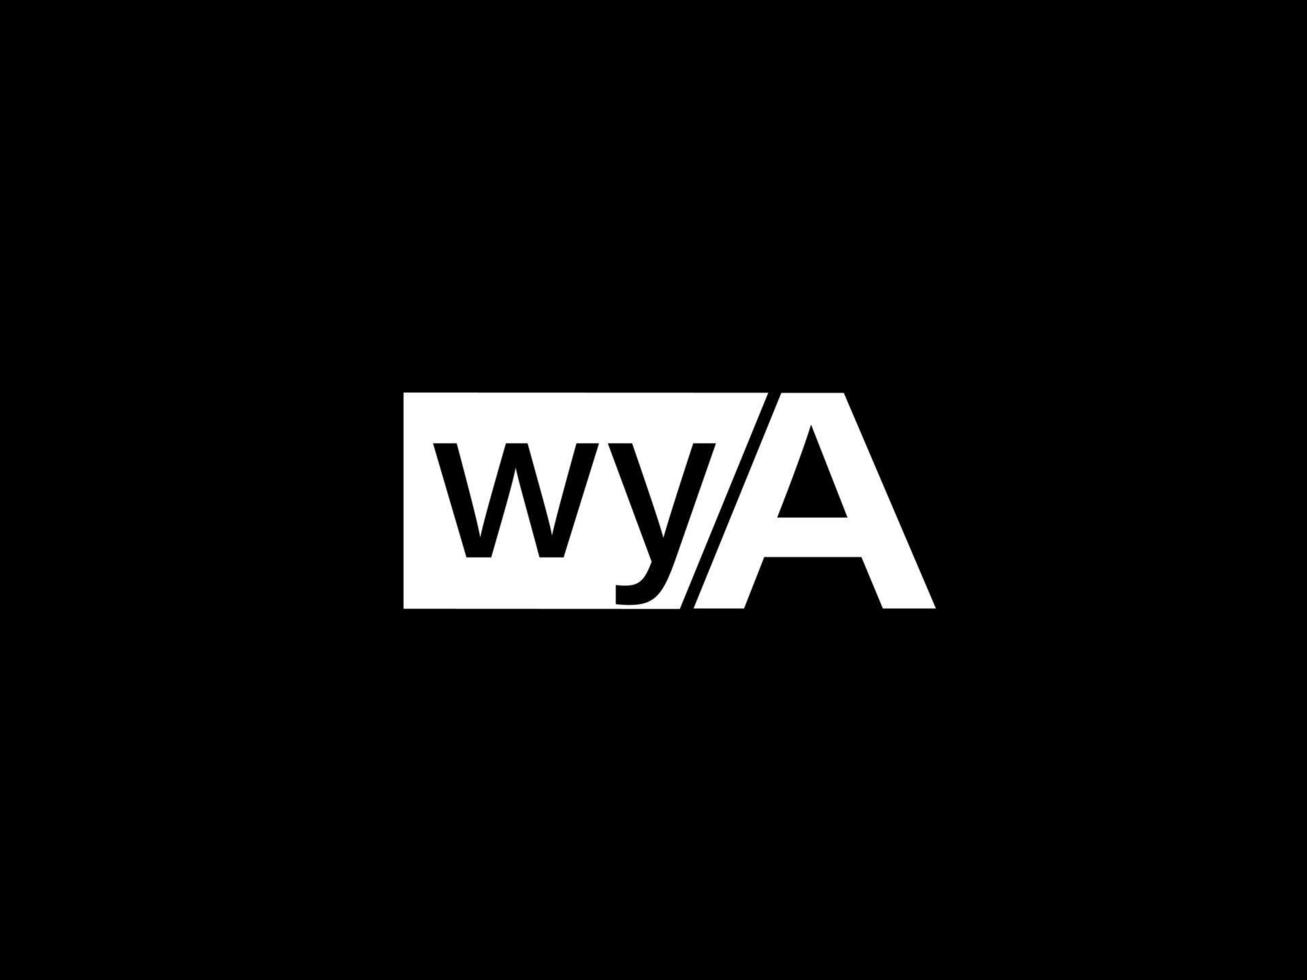 WYA Logo and Graphics design vector art, Icons isolated on black background